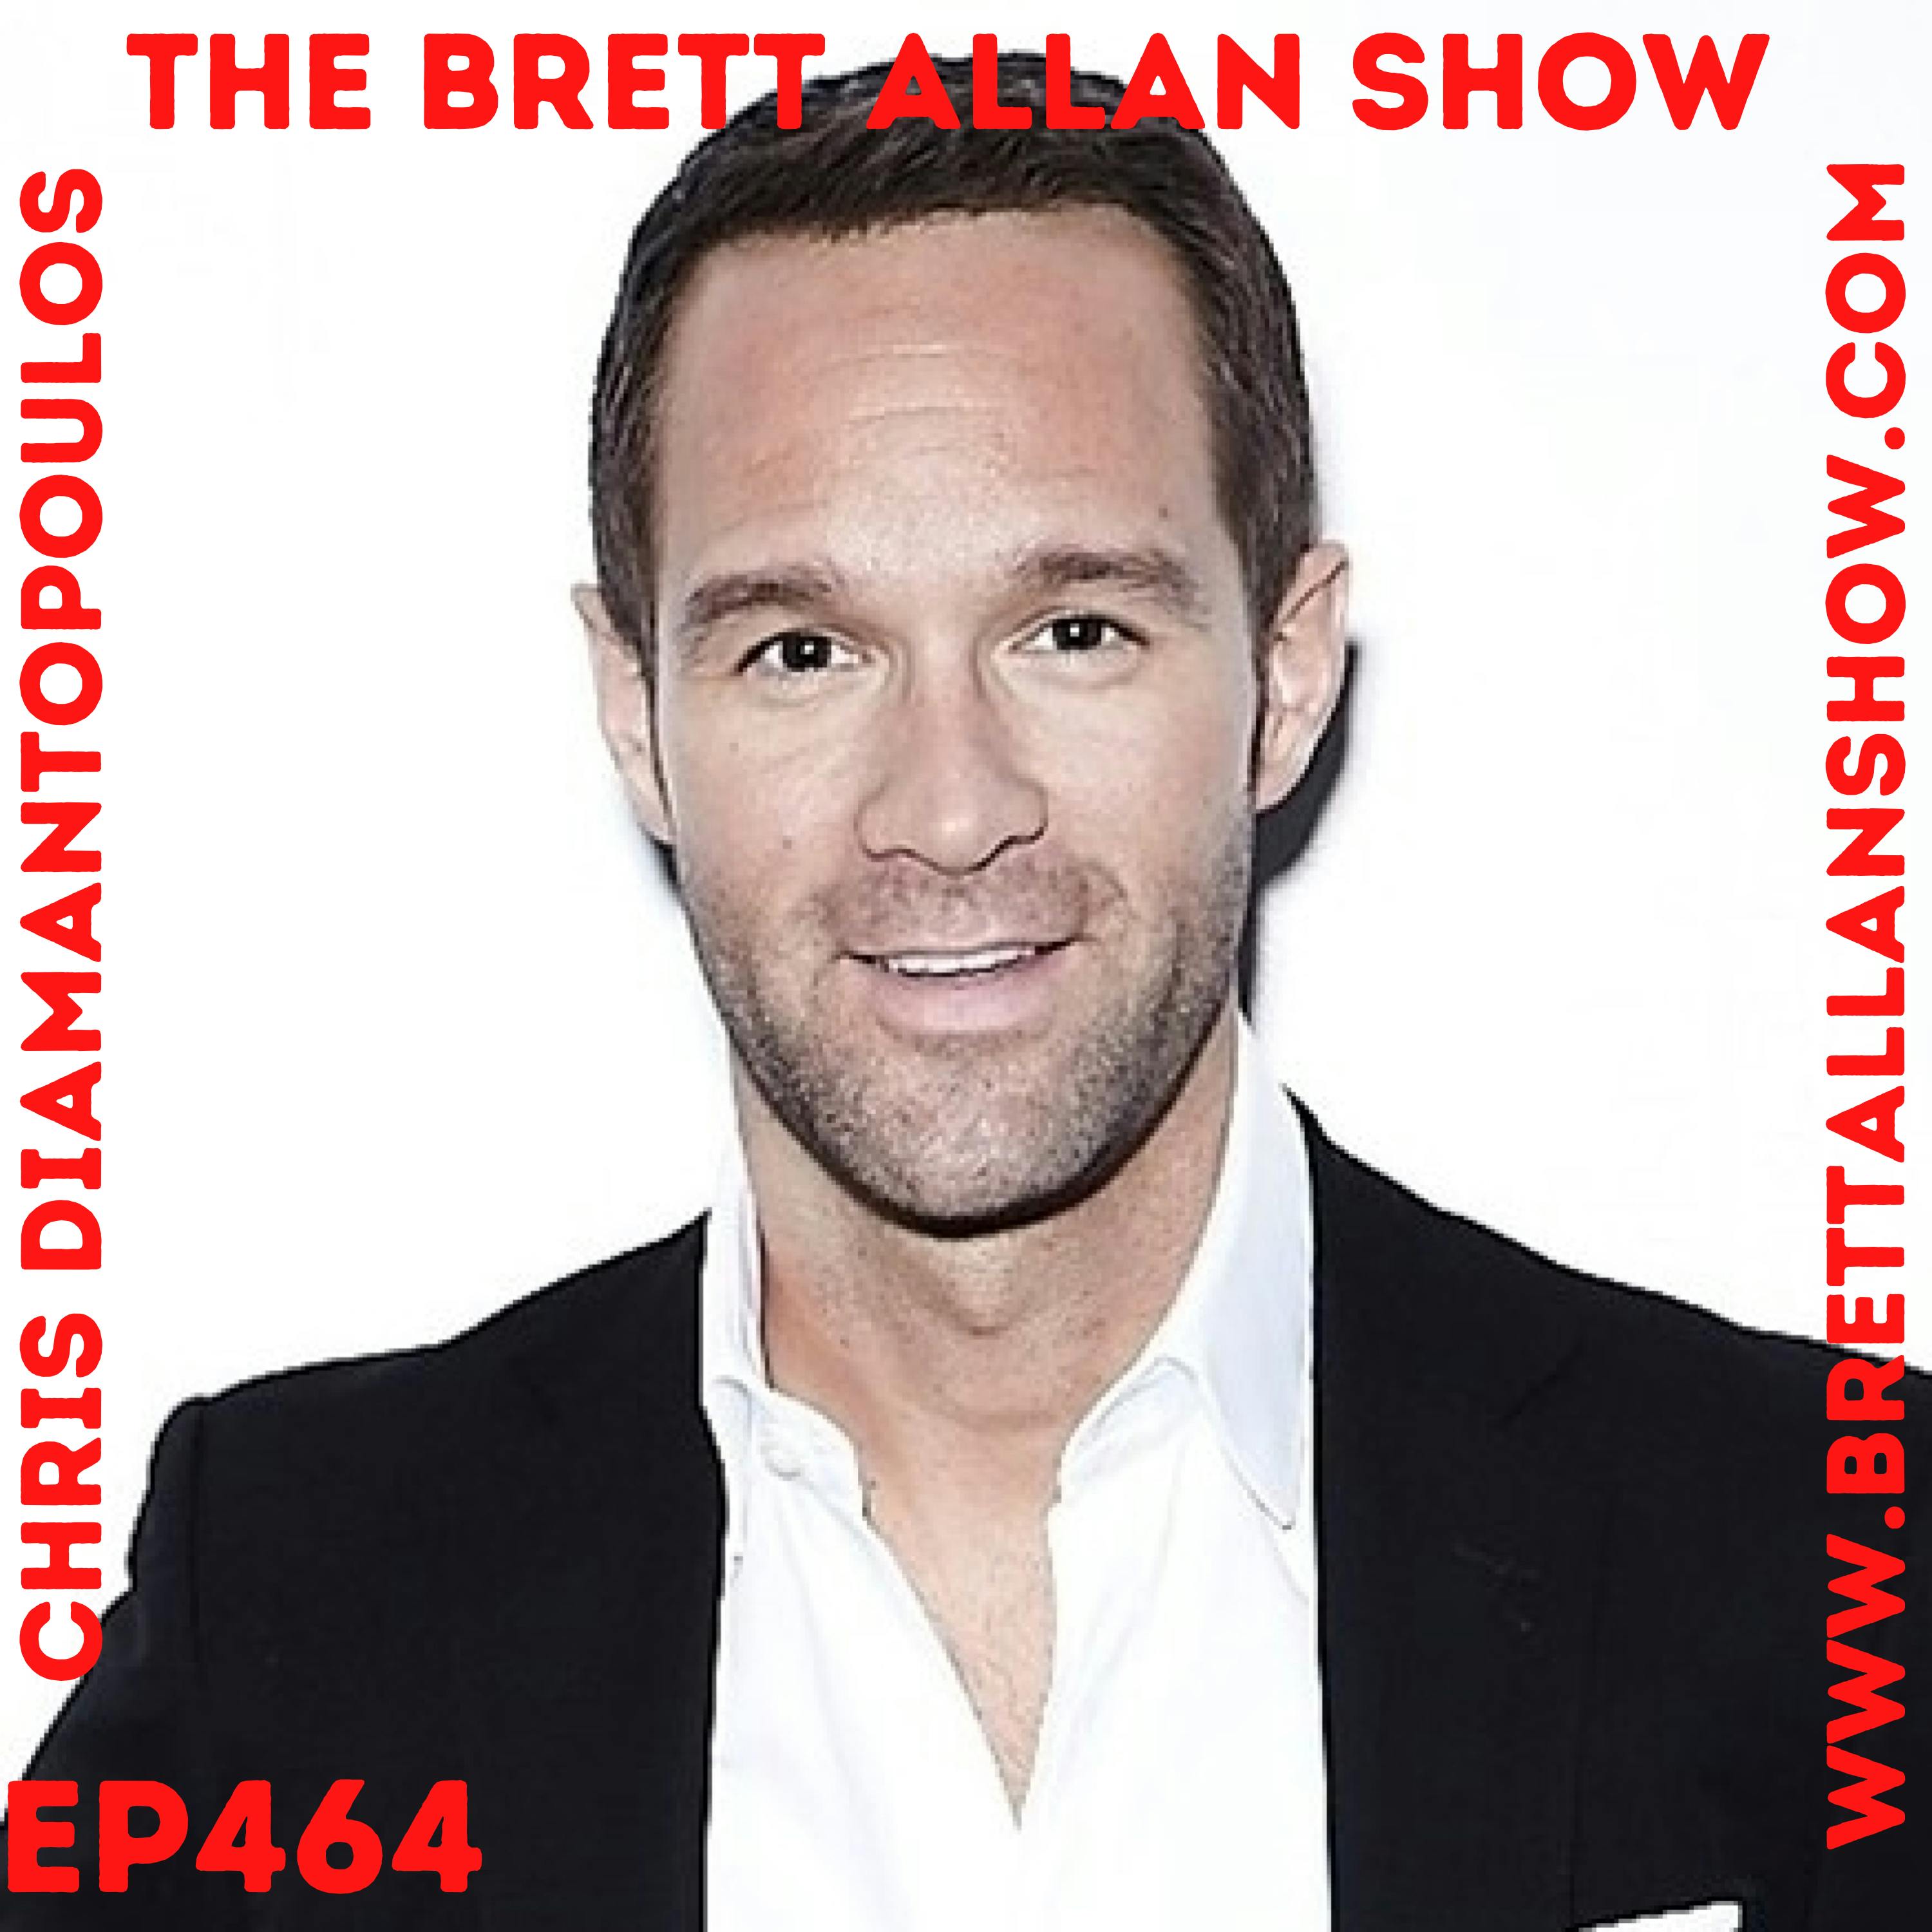 Chris Diamantopoulos Drops By for "High Heat" His Latest Feature, "The Three Stooges" and More! Image